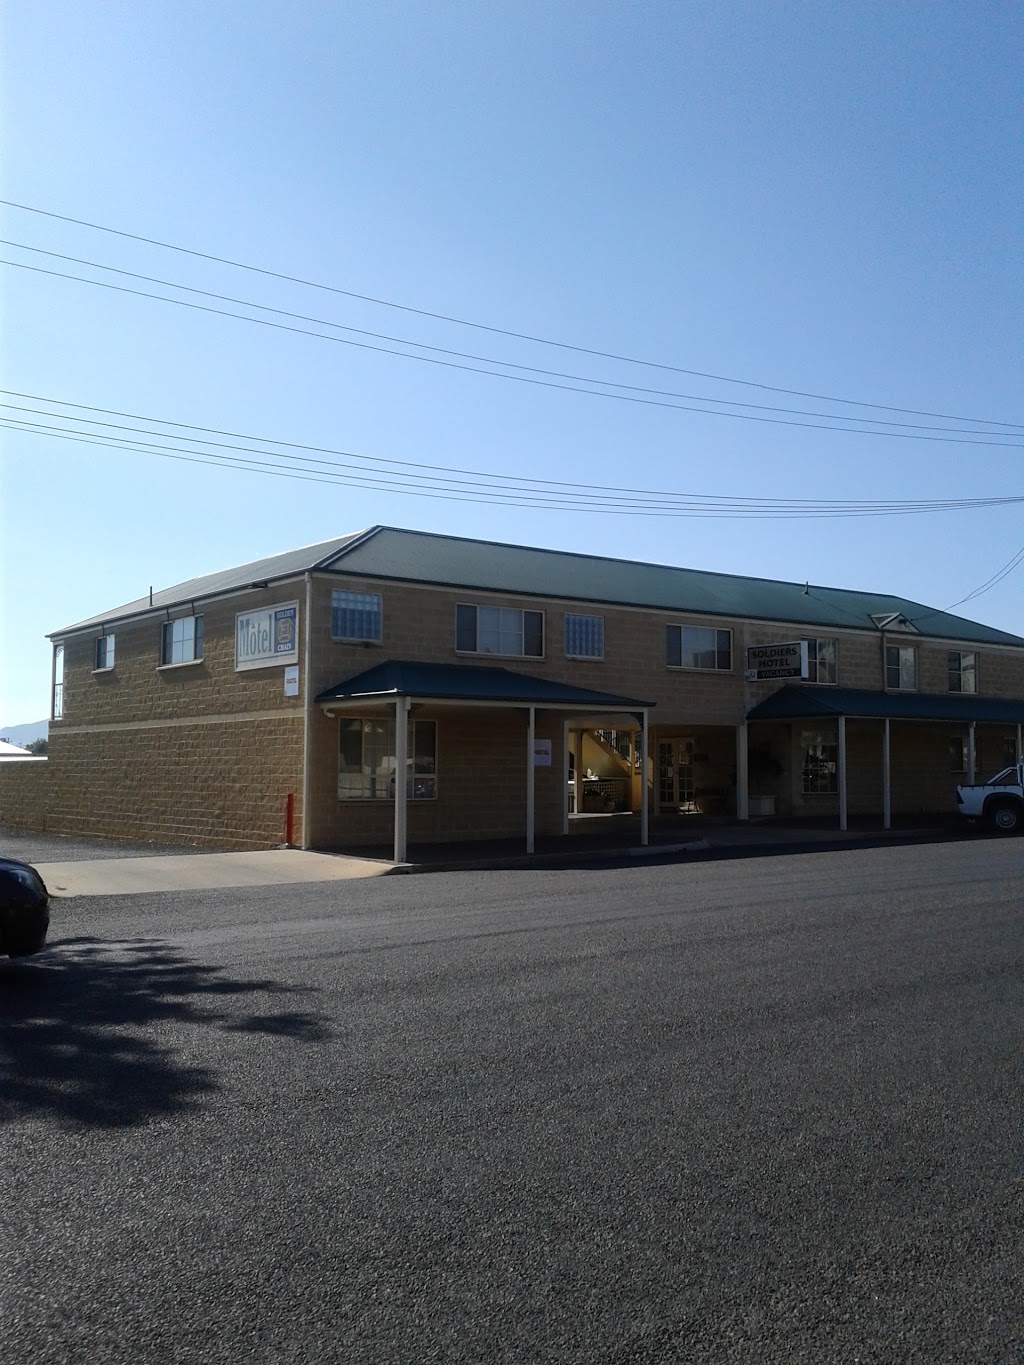 Soldiers Motel | lodging | 35 Perry St, Mudgee NSW 2850, Australia | 0263724399 OR +61 2 6372 4399